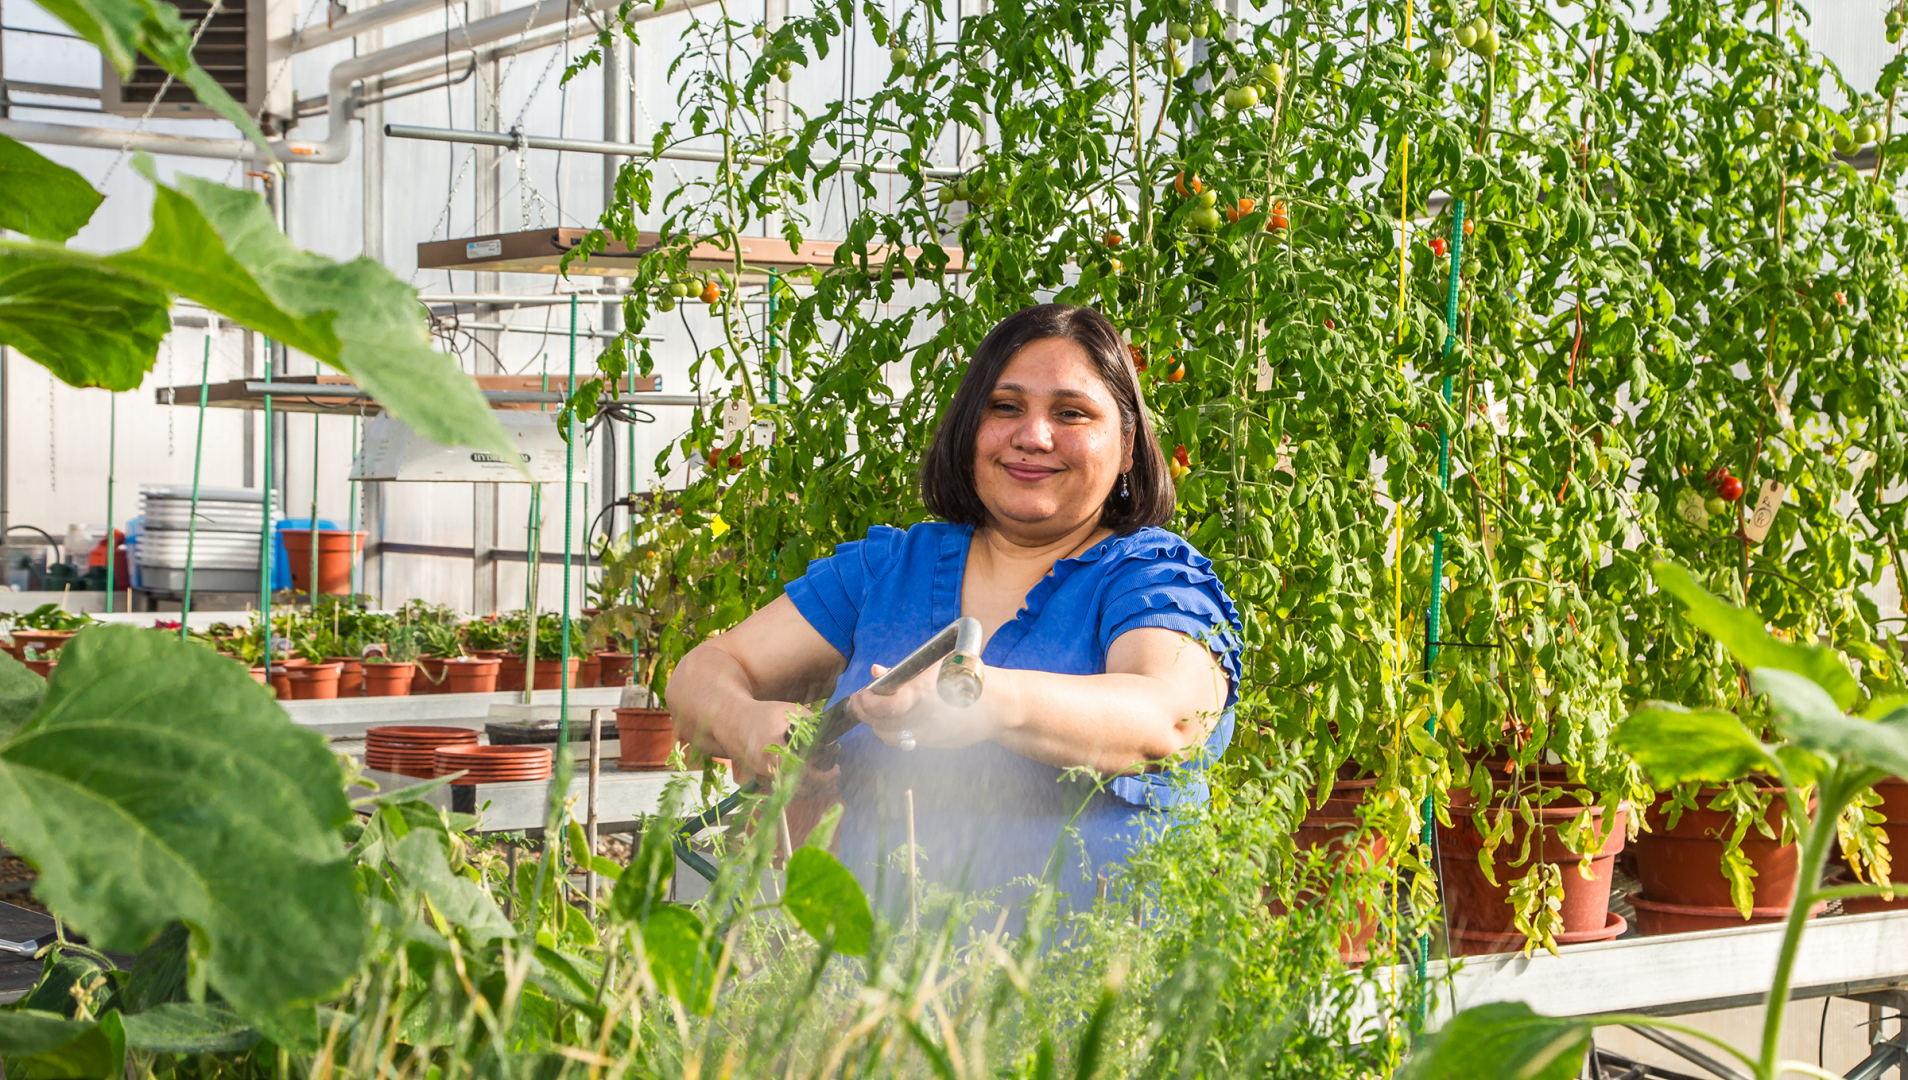 Dr. Poonam Singh stands just the the right of the centre of the photo with green plants in the background and foreground. She is wearing a blue t-shirt and holds a hose that is water the plants in front of her. 